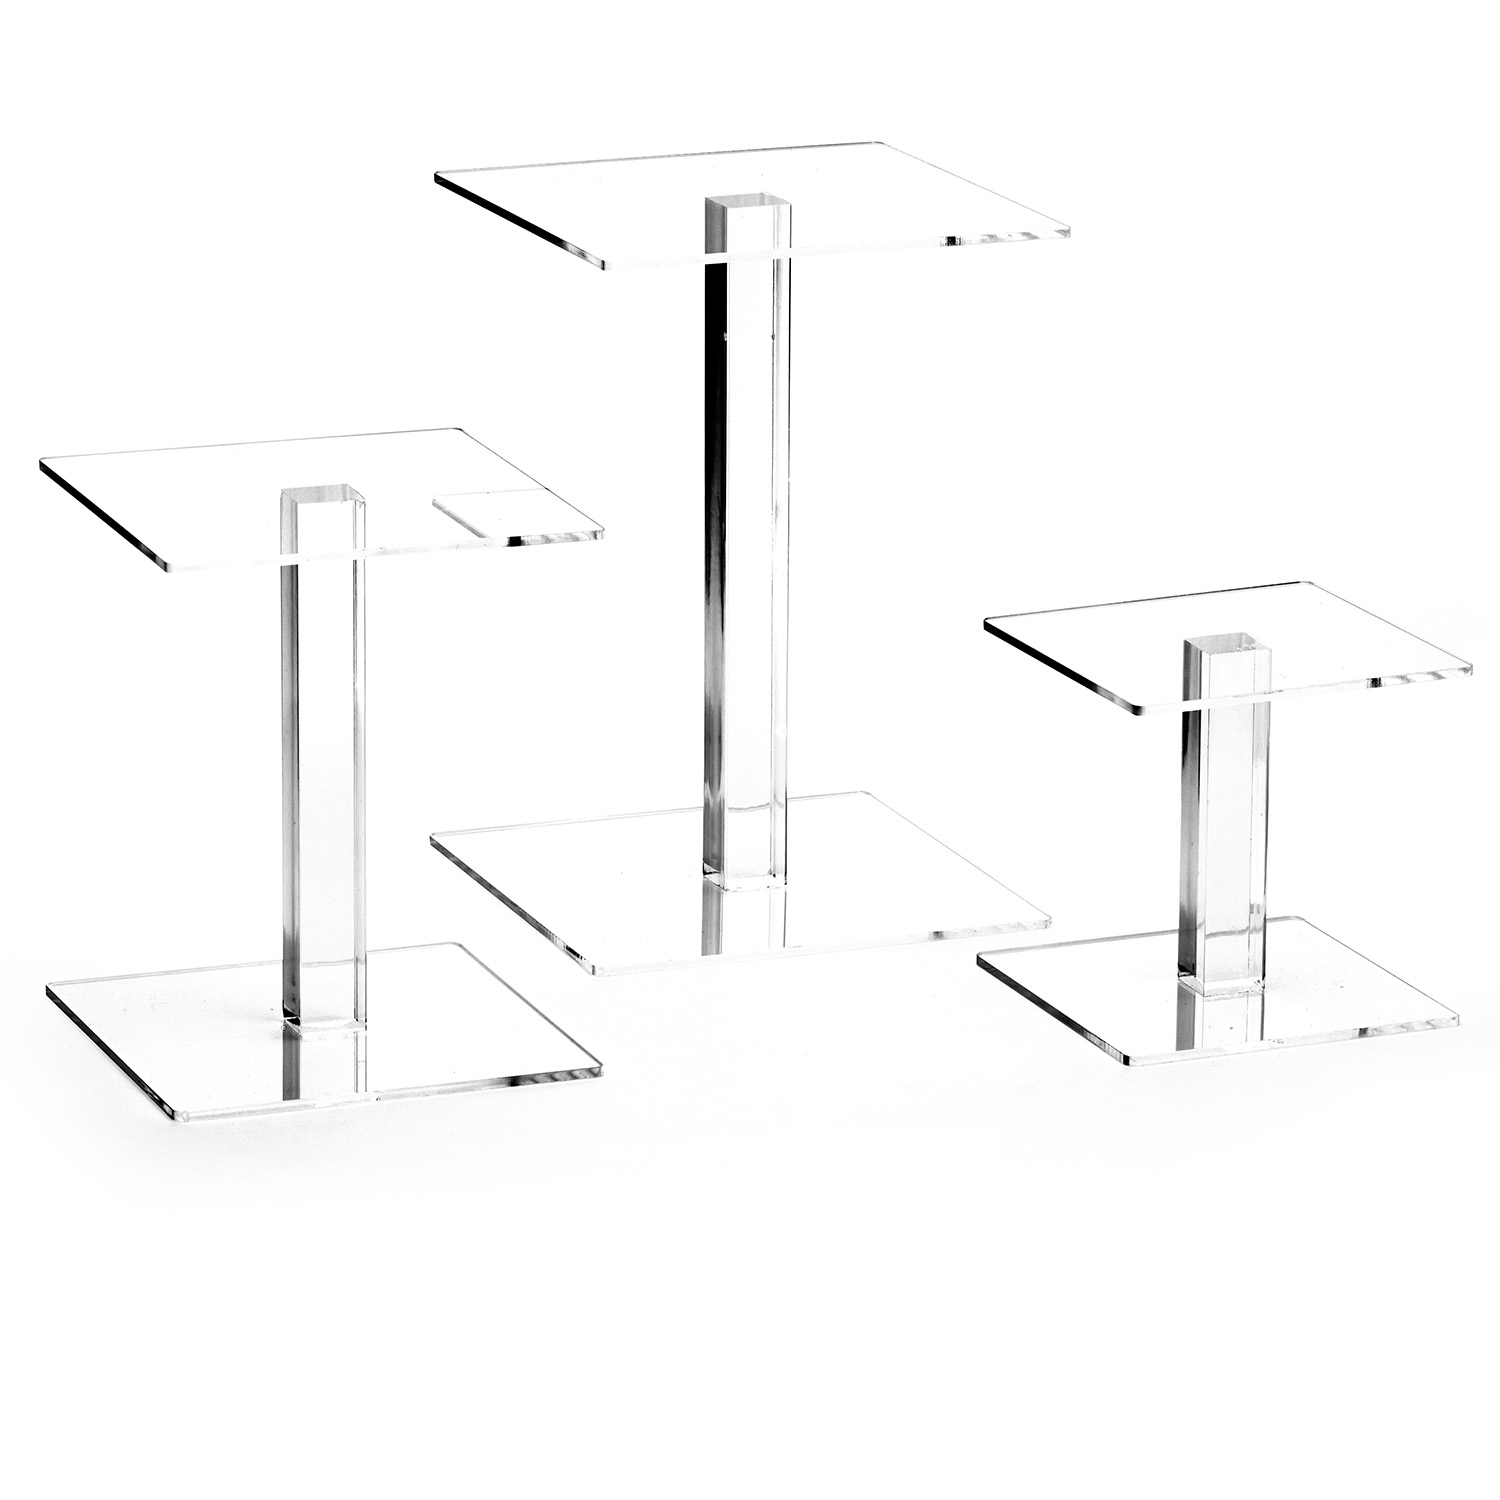 Plastic Risers Display Stand Pedestal 3" X 3" X 3" ~3 Clear Acrylic 